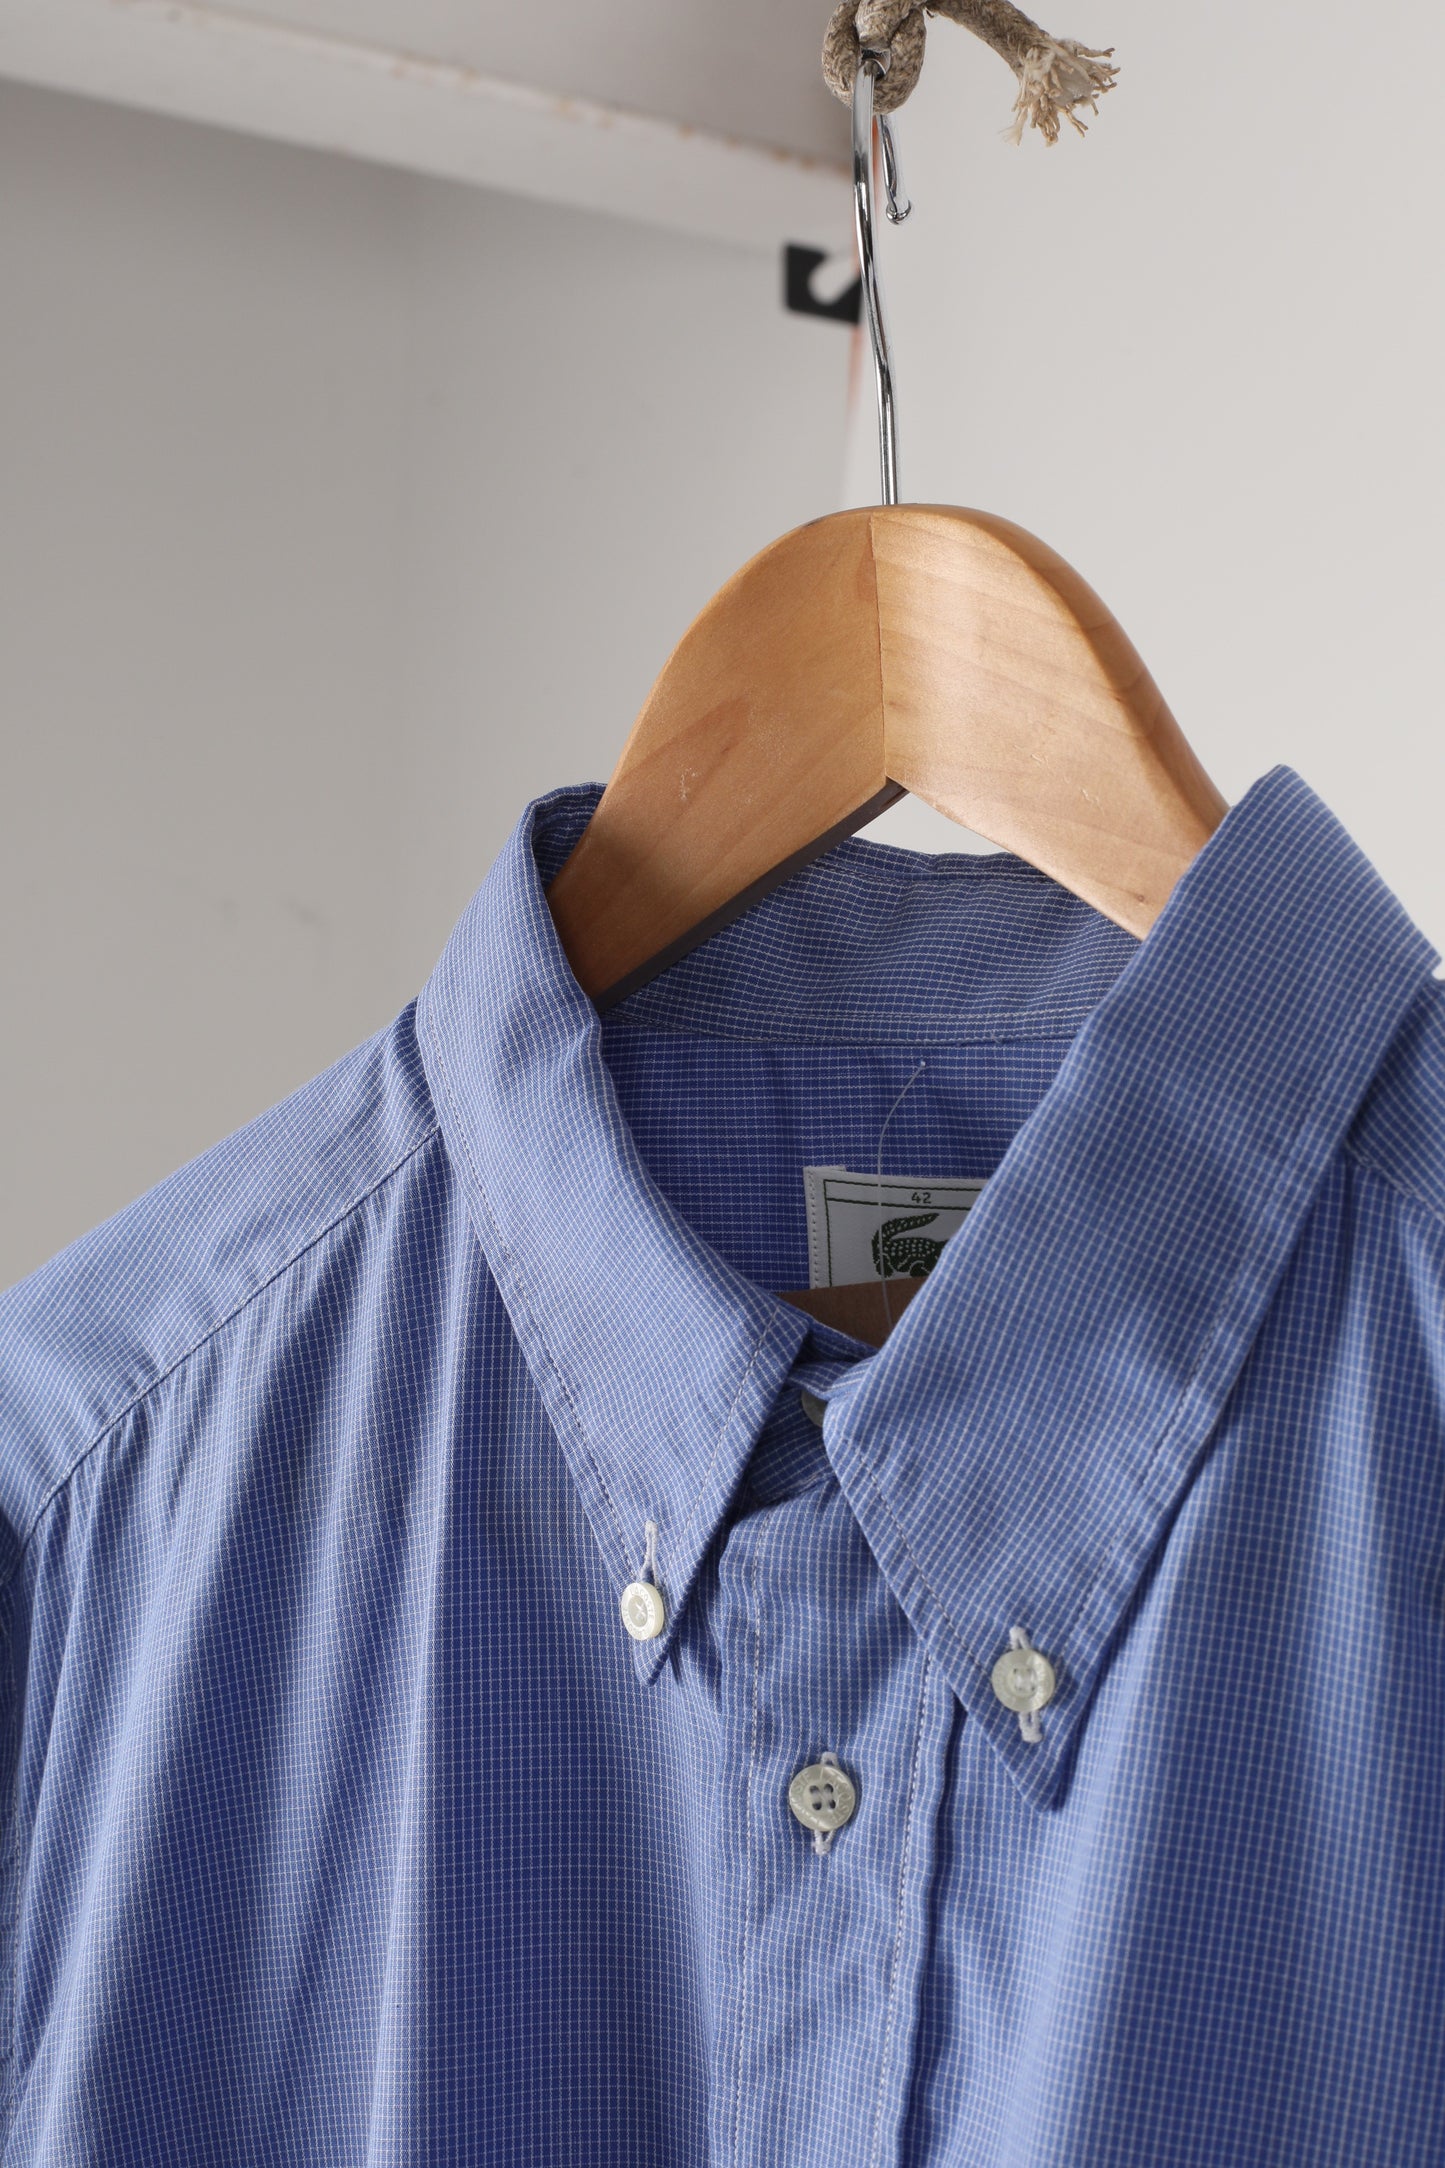 90s Lacoste Gingham check blue Oxford shirt (42)